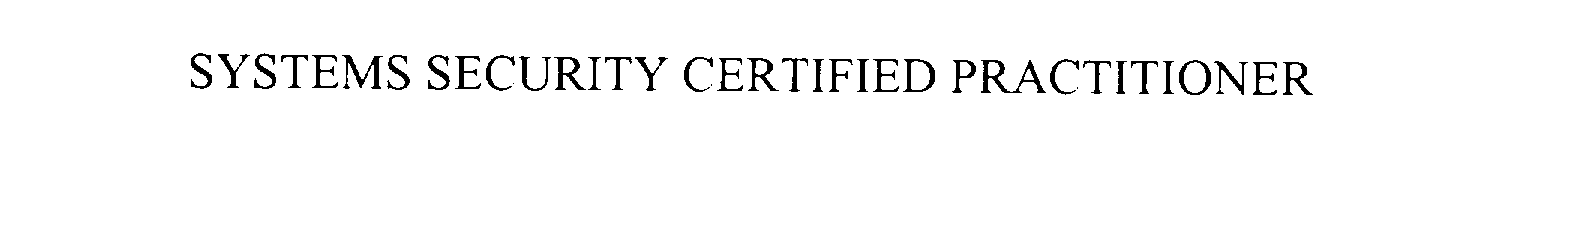 Trademark Logo SYSTEMS SECURITY CERTIFIED PRACTITIONER